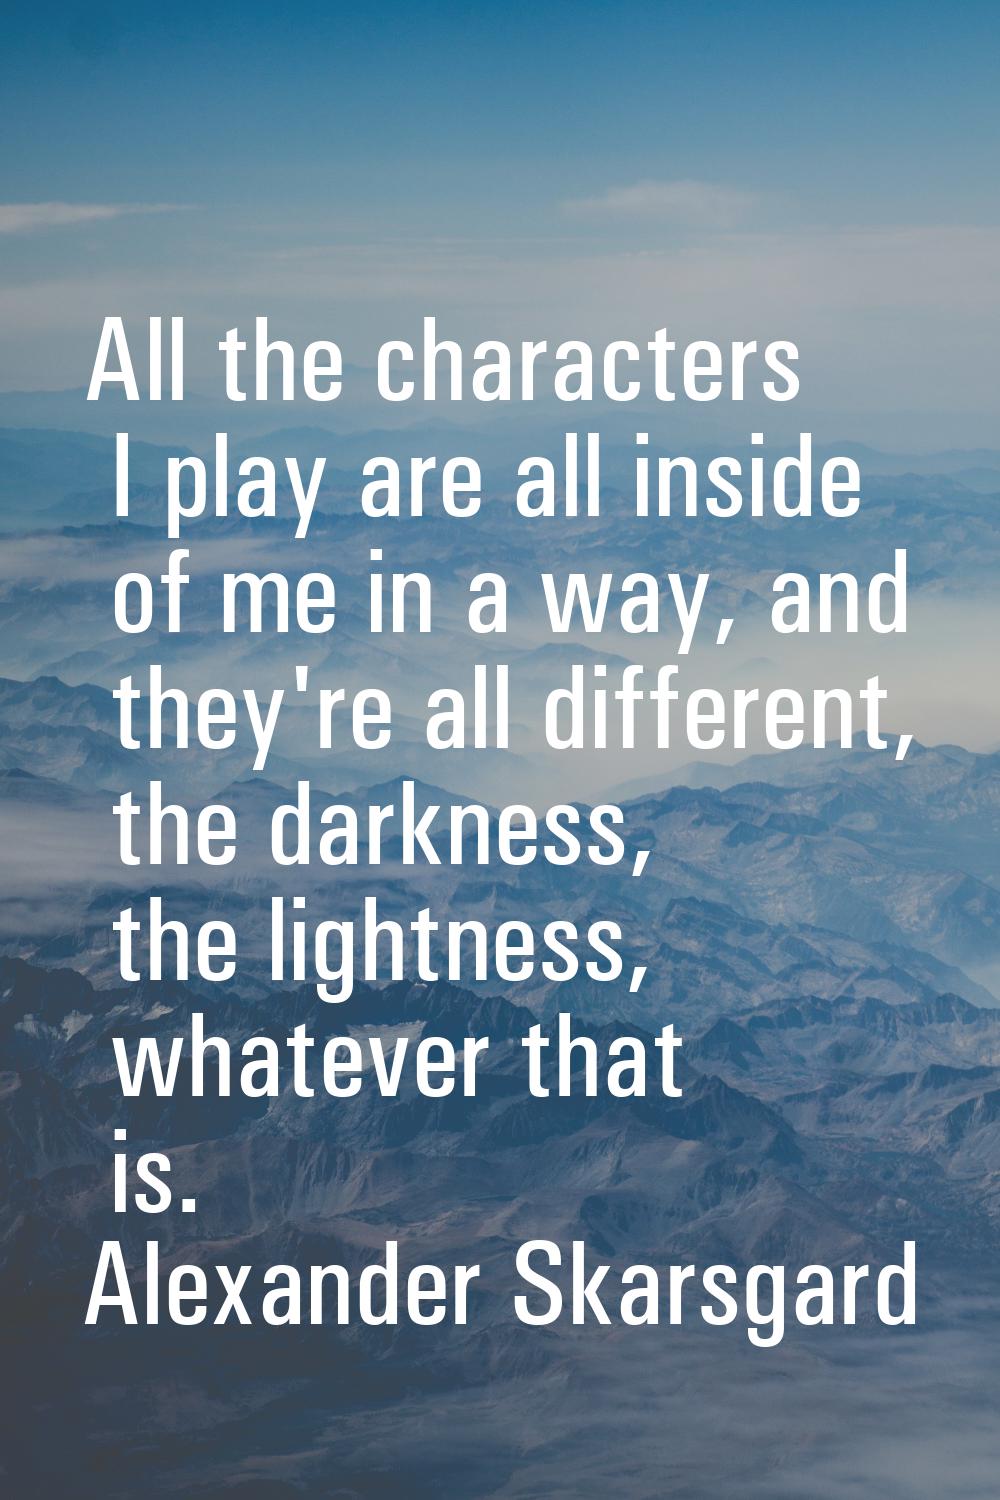 All the characters I play are all inside of me in a way, and they're all different, the darkness, t